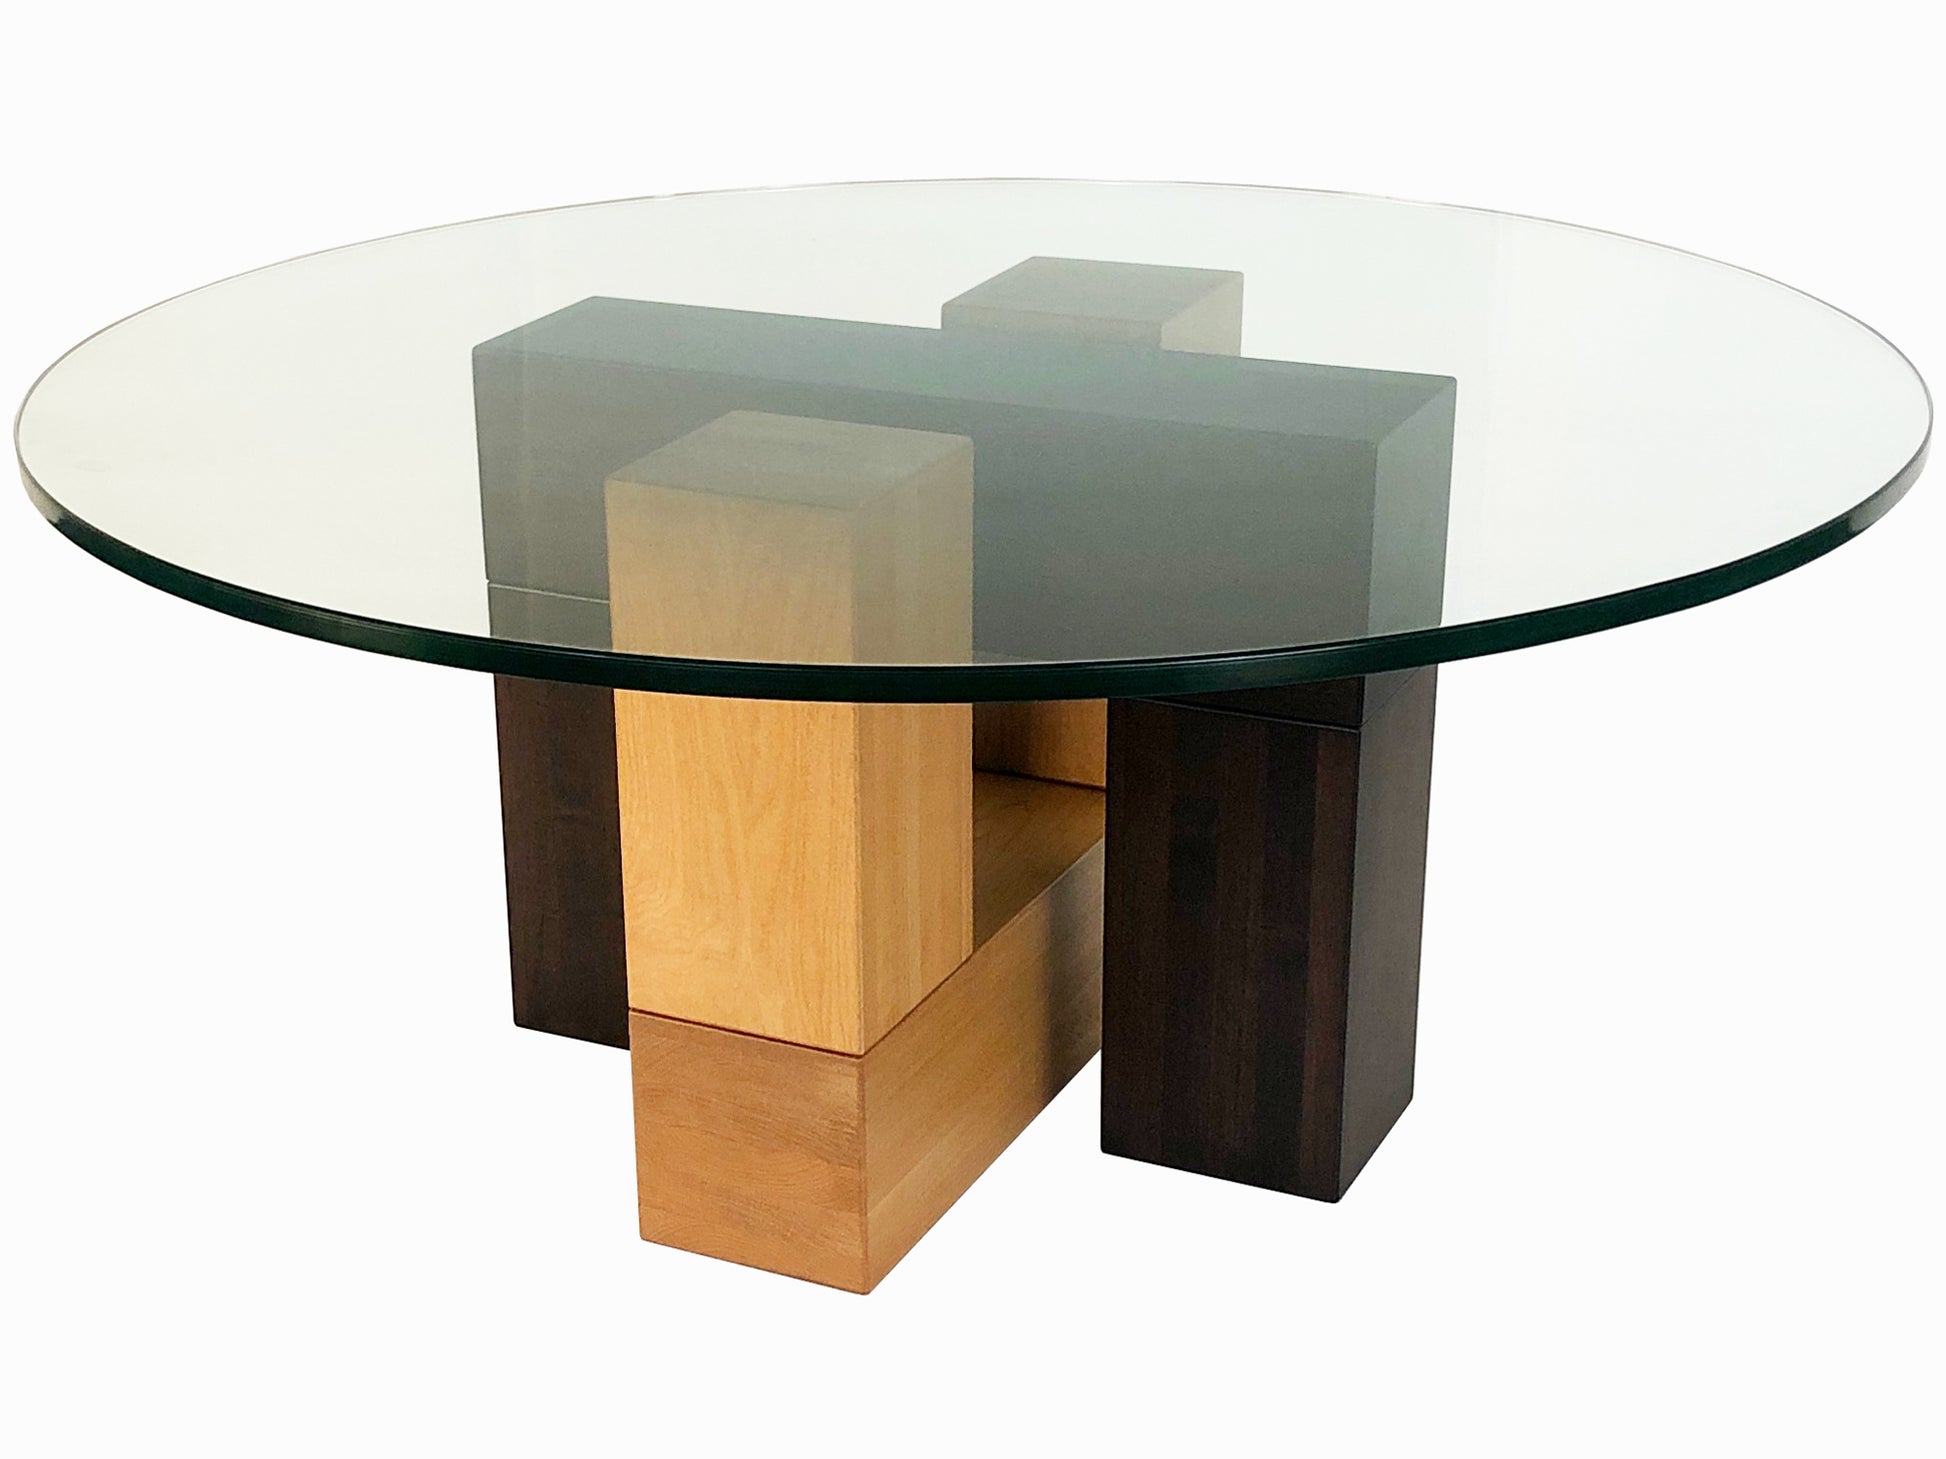 Tangent Round Coffee Table - alternative configuration 4 - see video